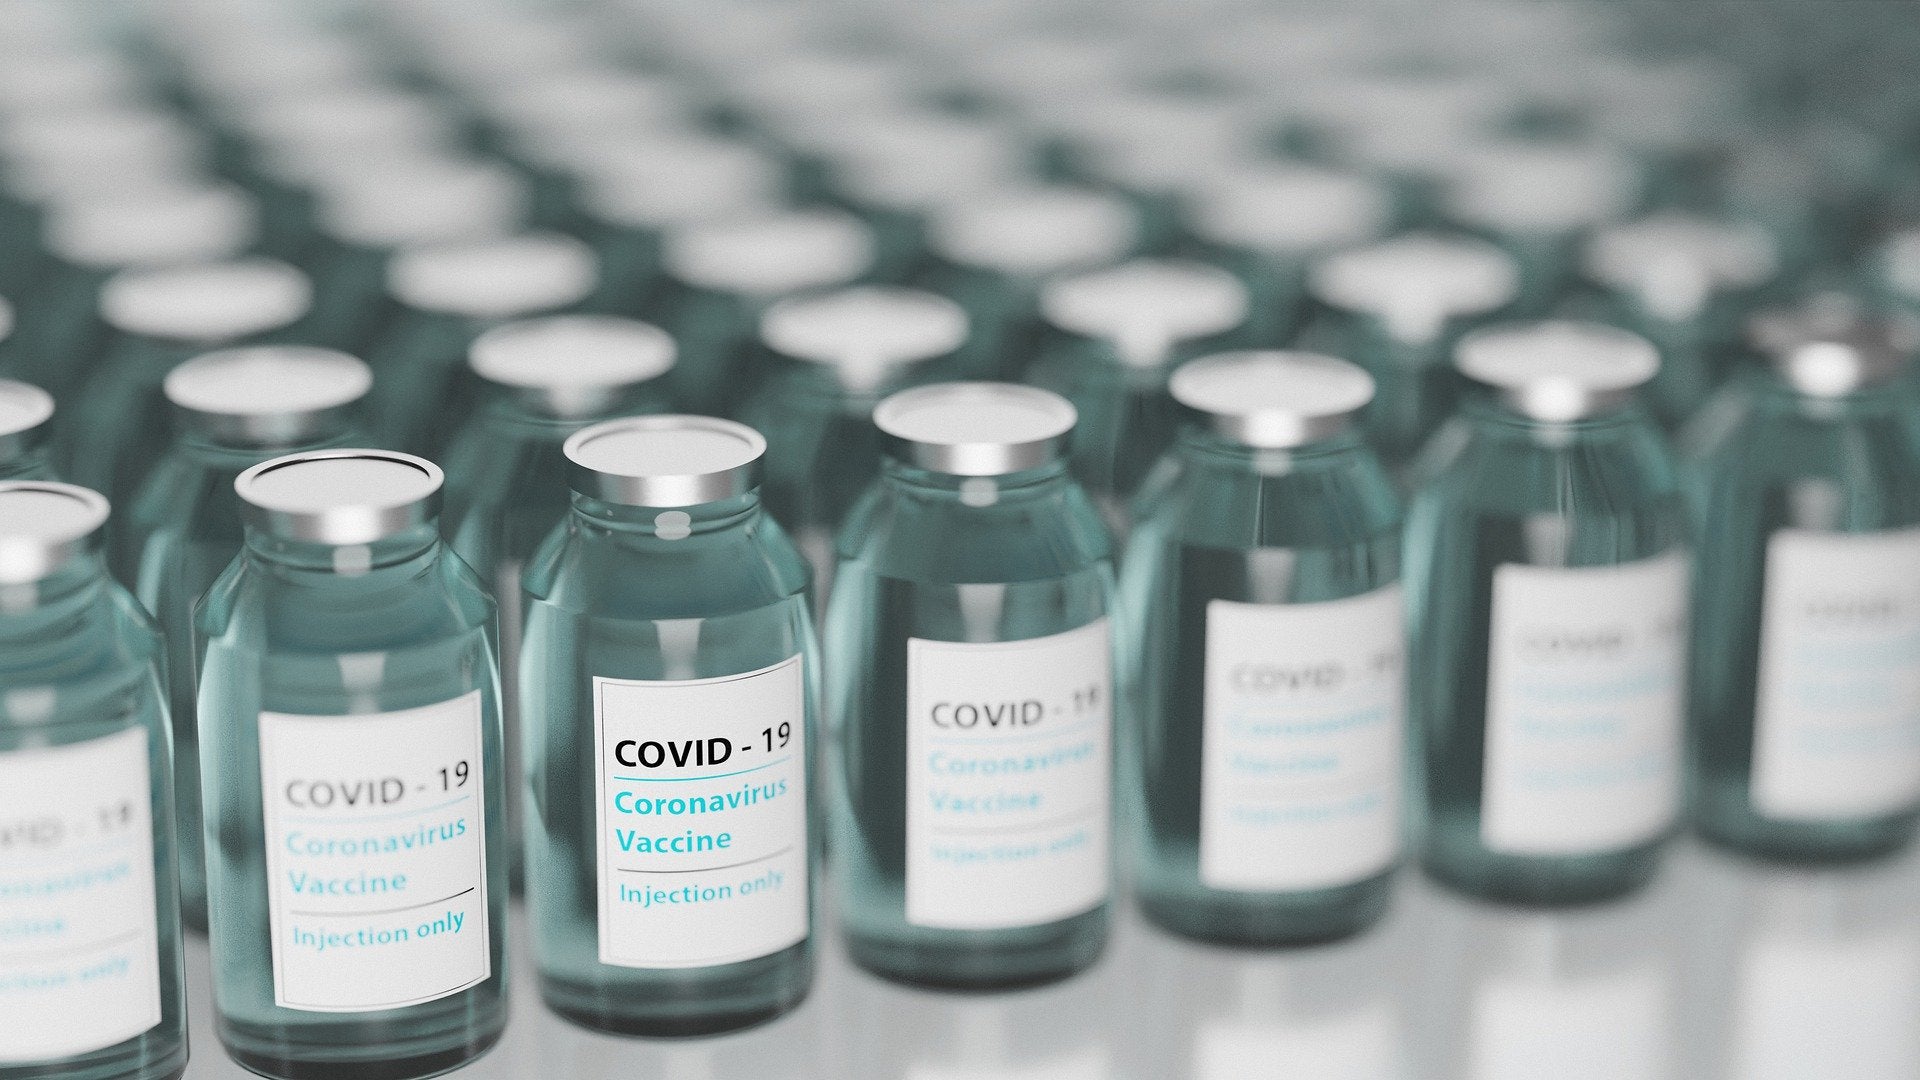 Senegal and Team Europe to set up Covid-19 vaccine production facility